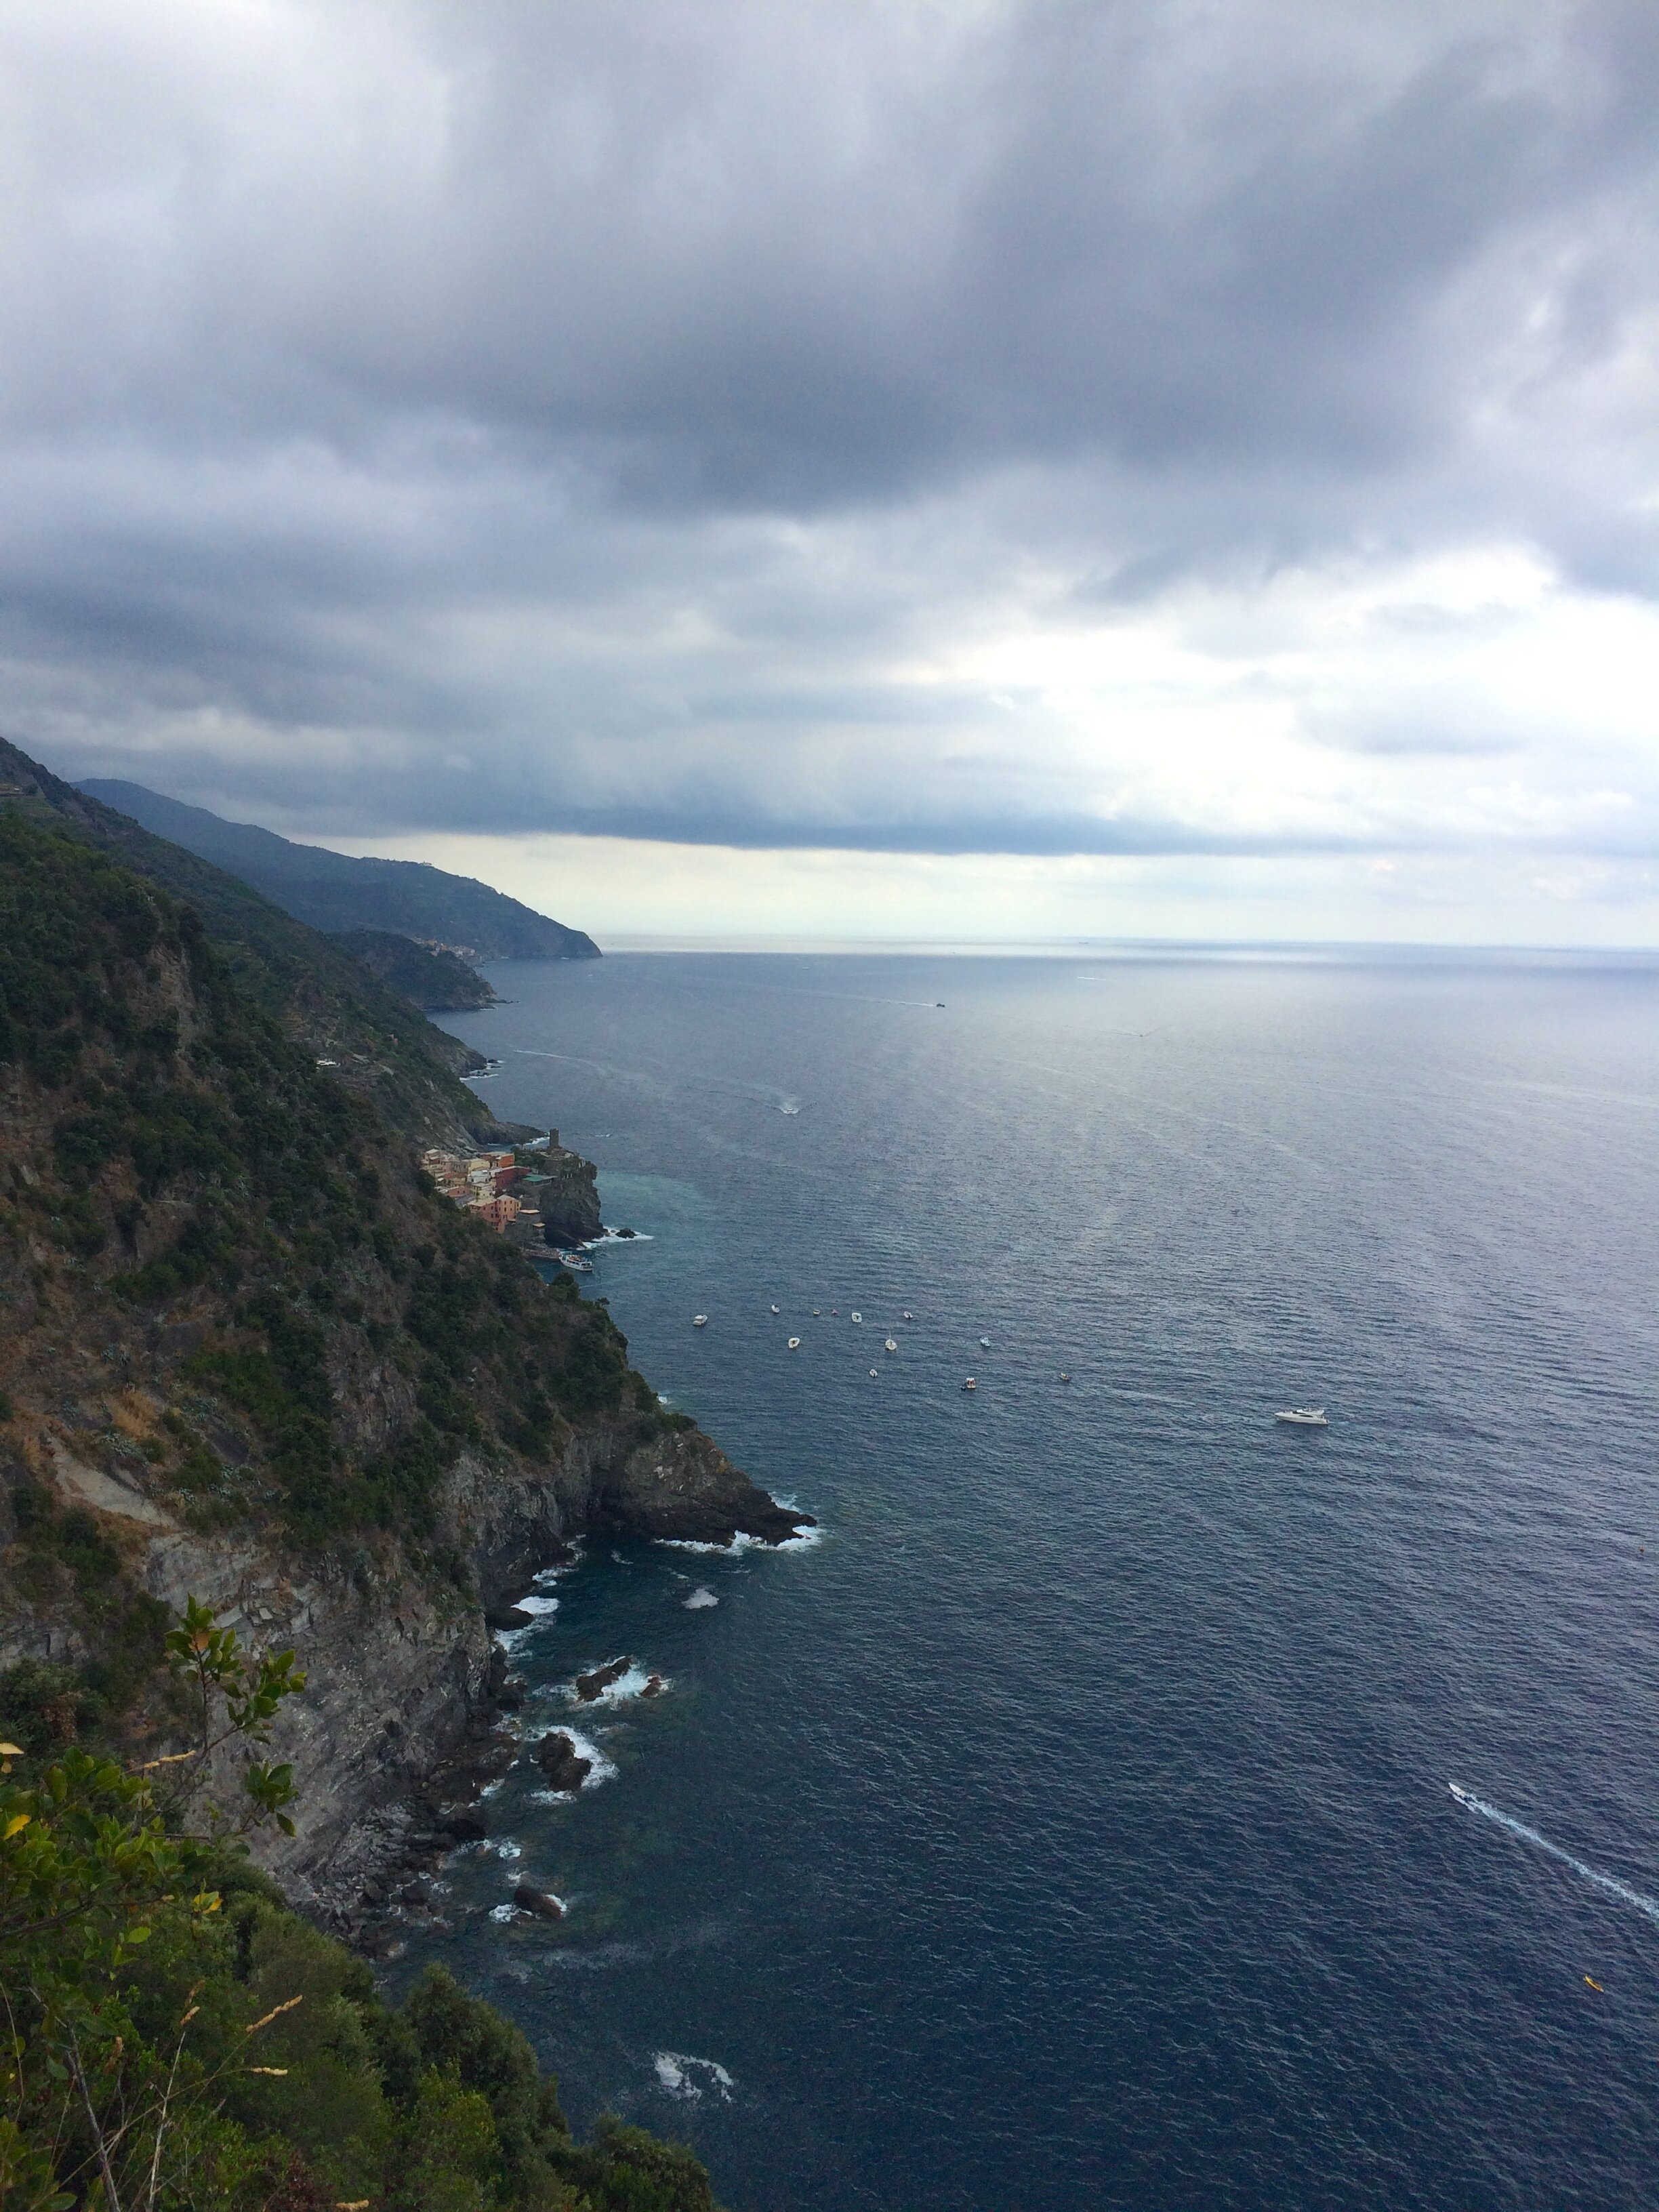 Hike from Monterosso towards Vernazza